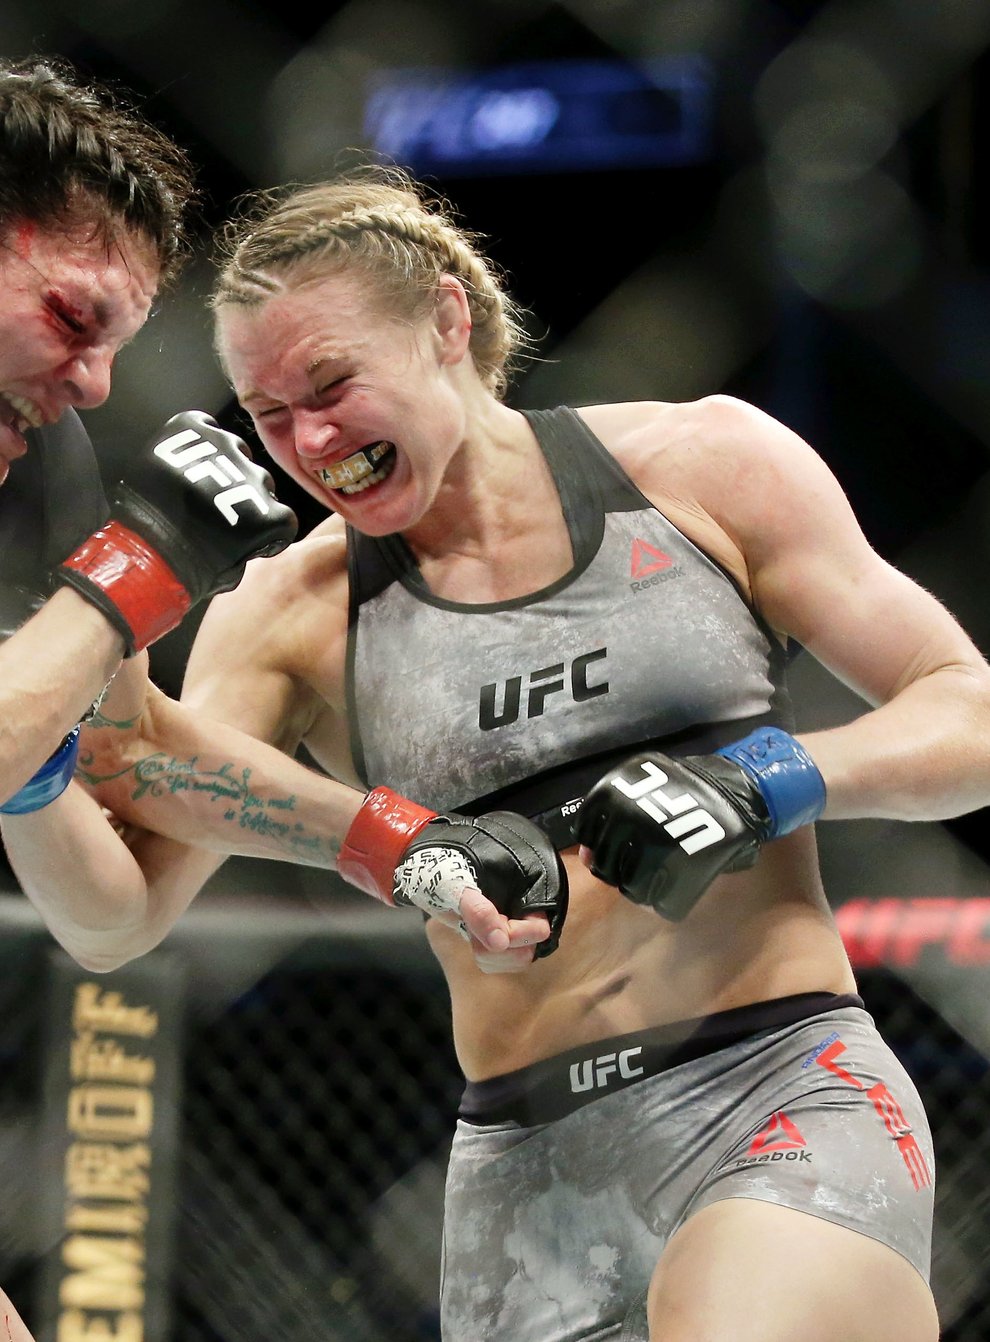 Lee (right) was distraught at her split decision loss at UFC 247 (PA Images)